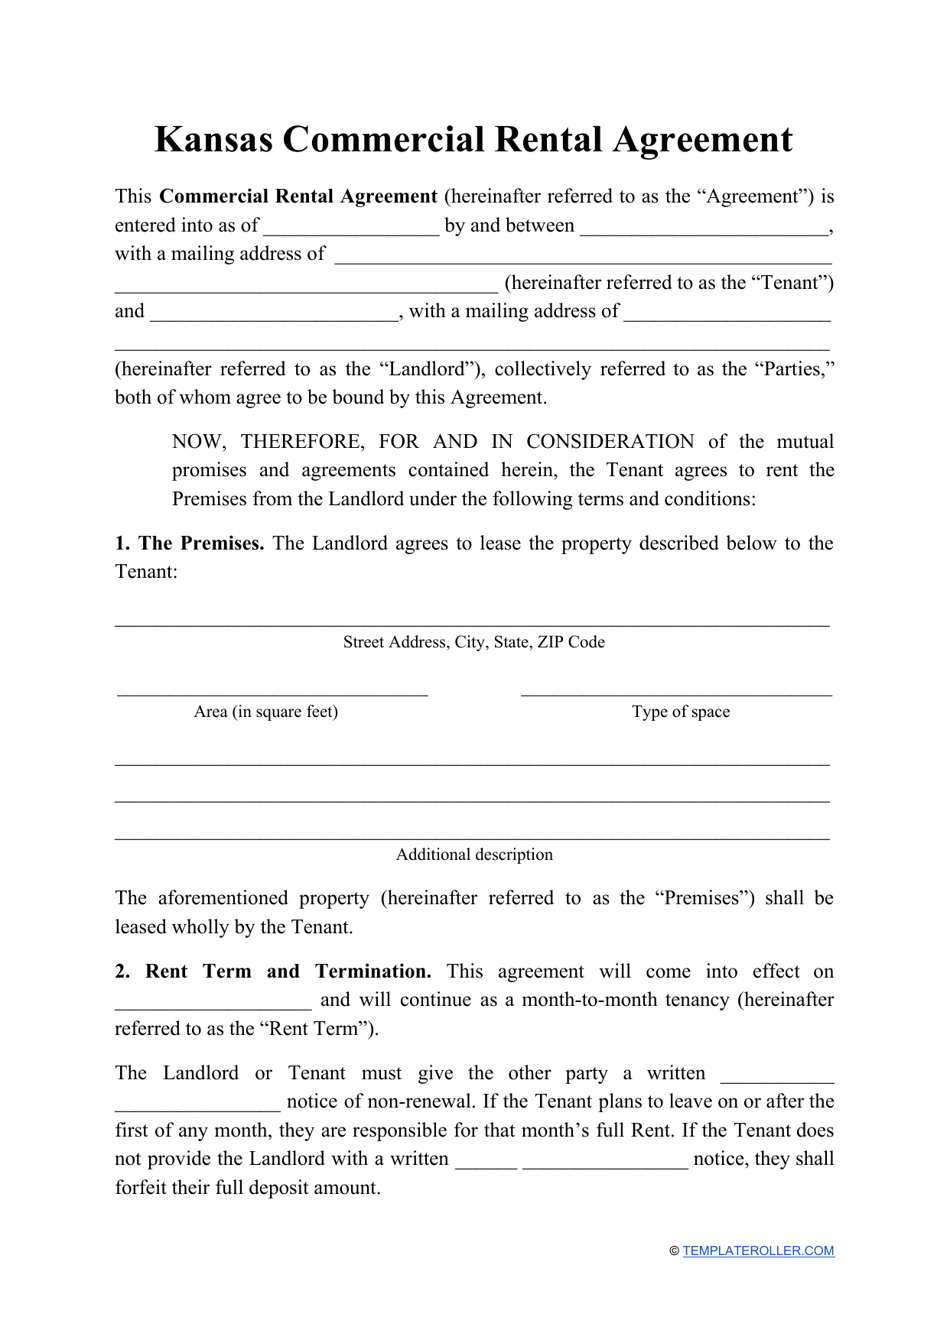 Commercial Rental Agreement Template - Kansas, Page 1